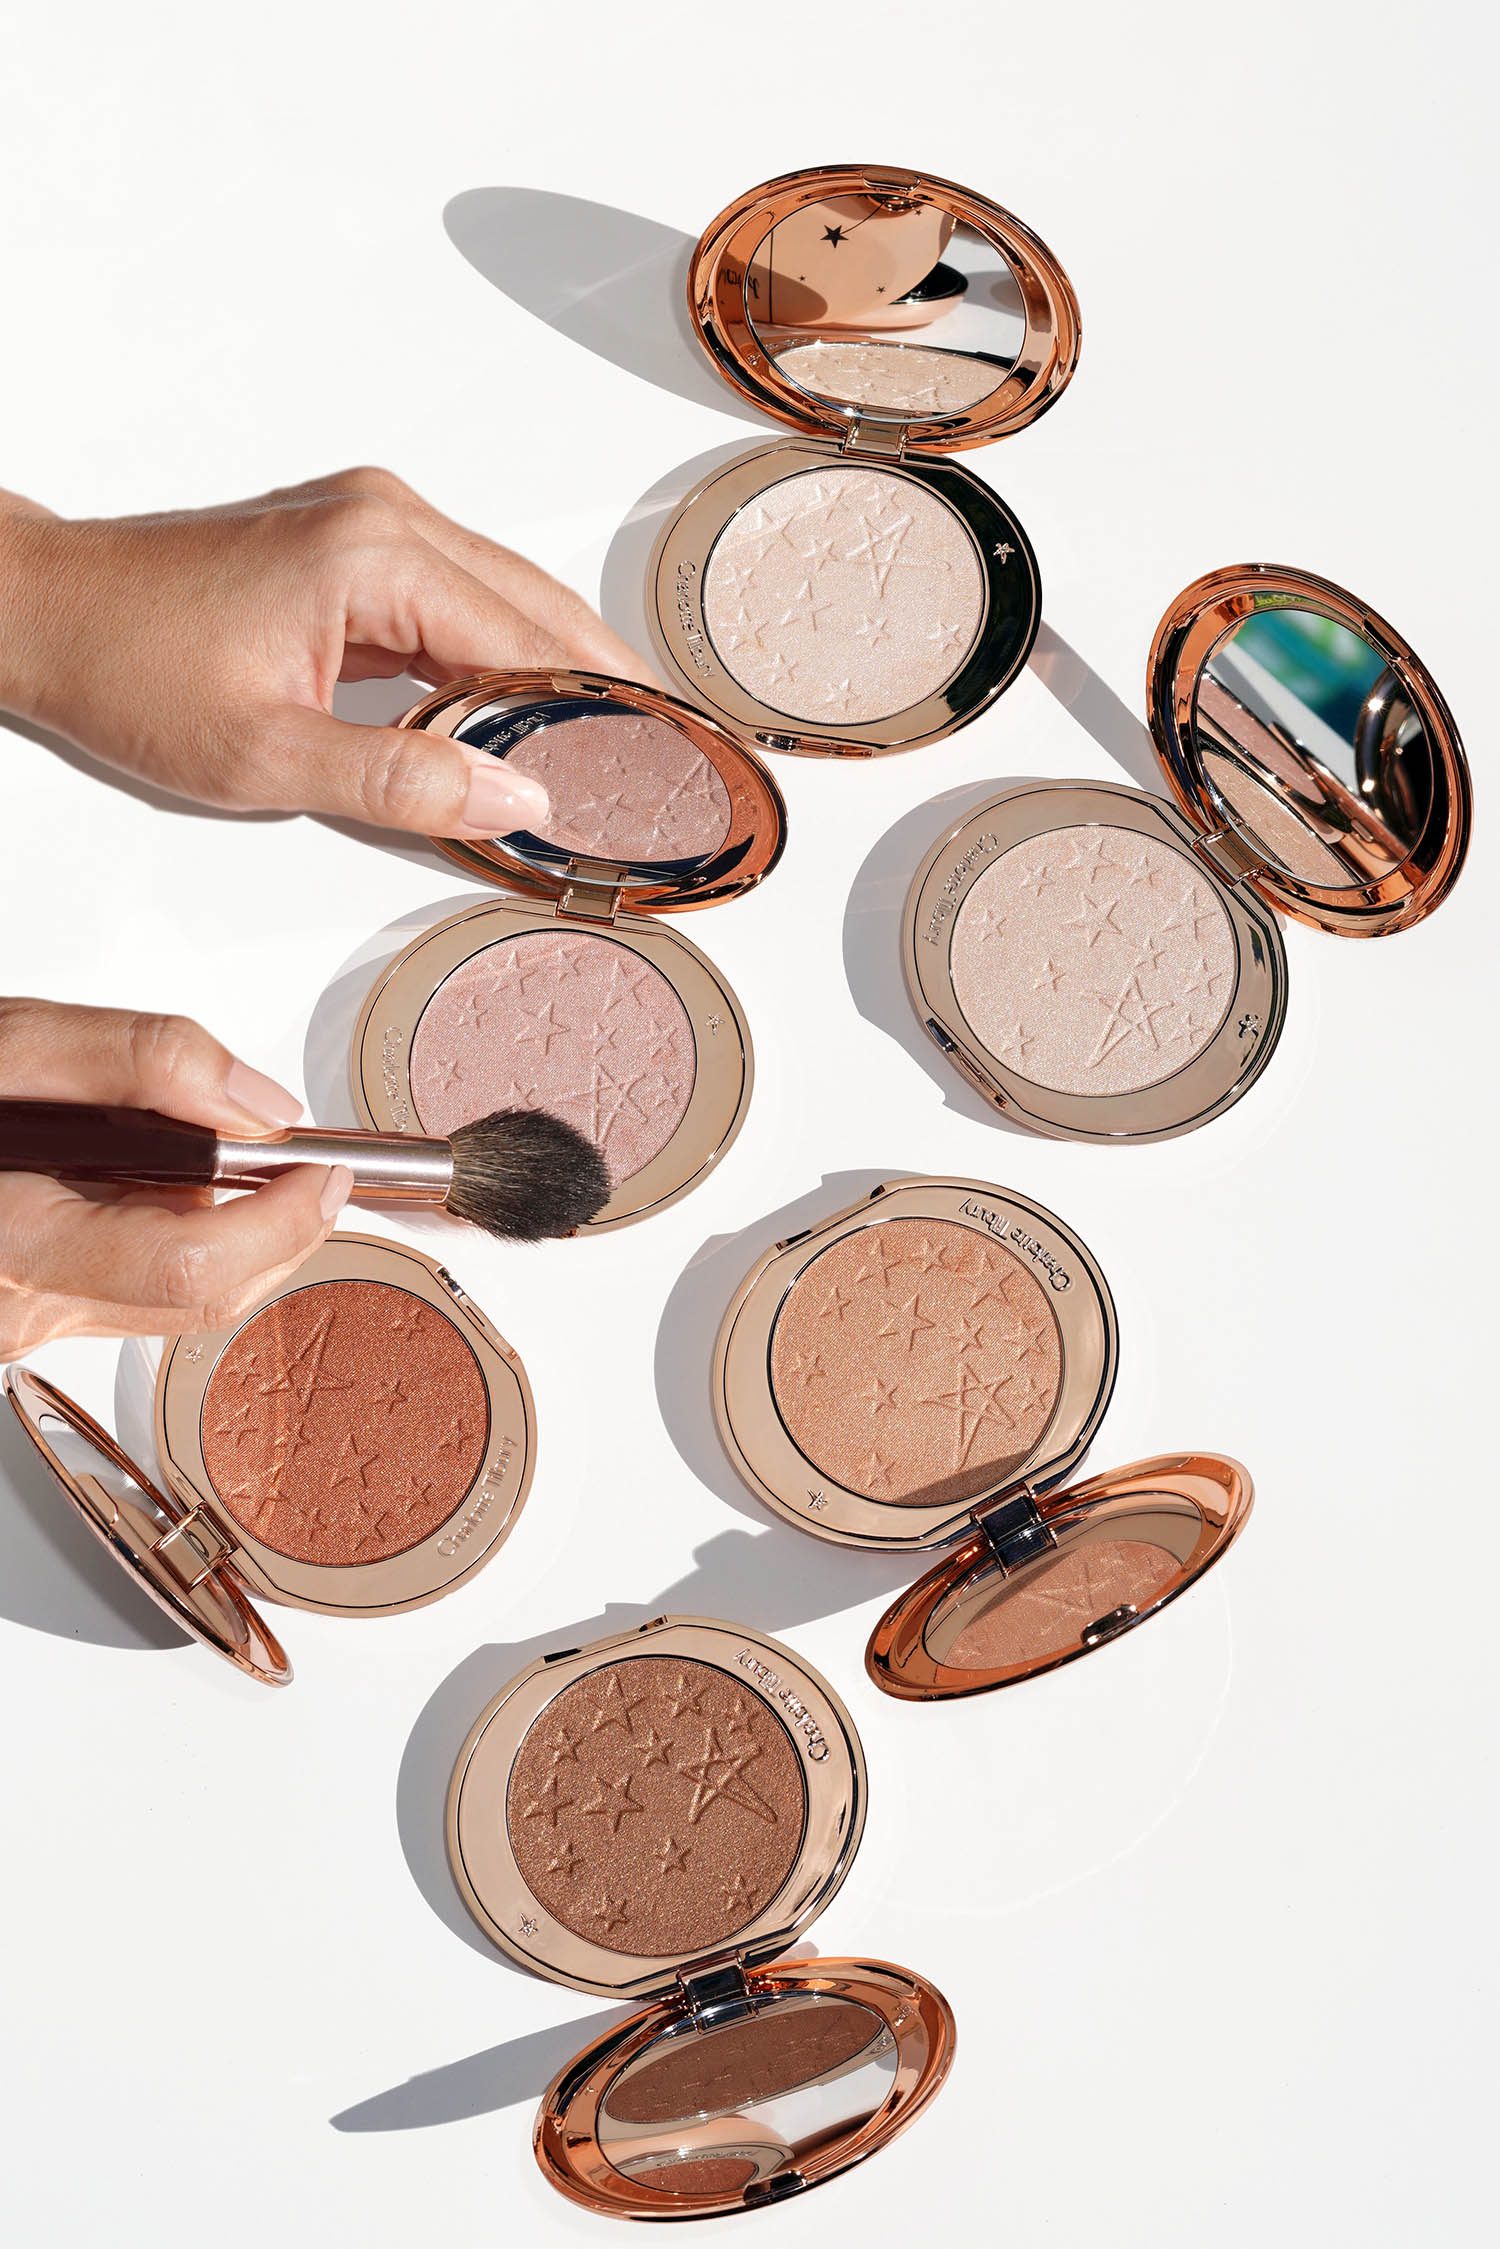 Charlotte Tilbury Just Released a New Range of Highlighters